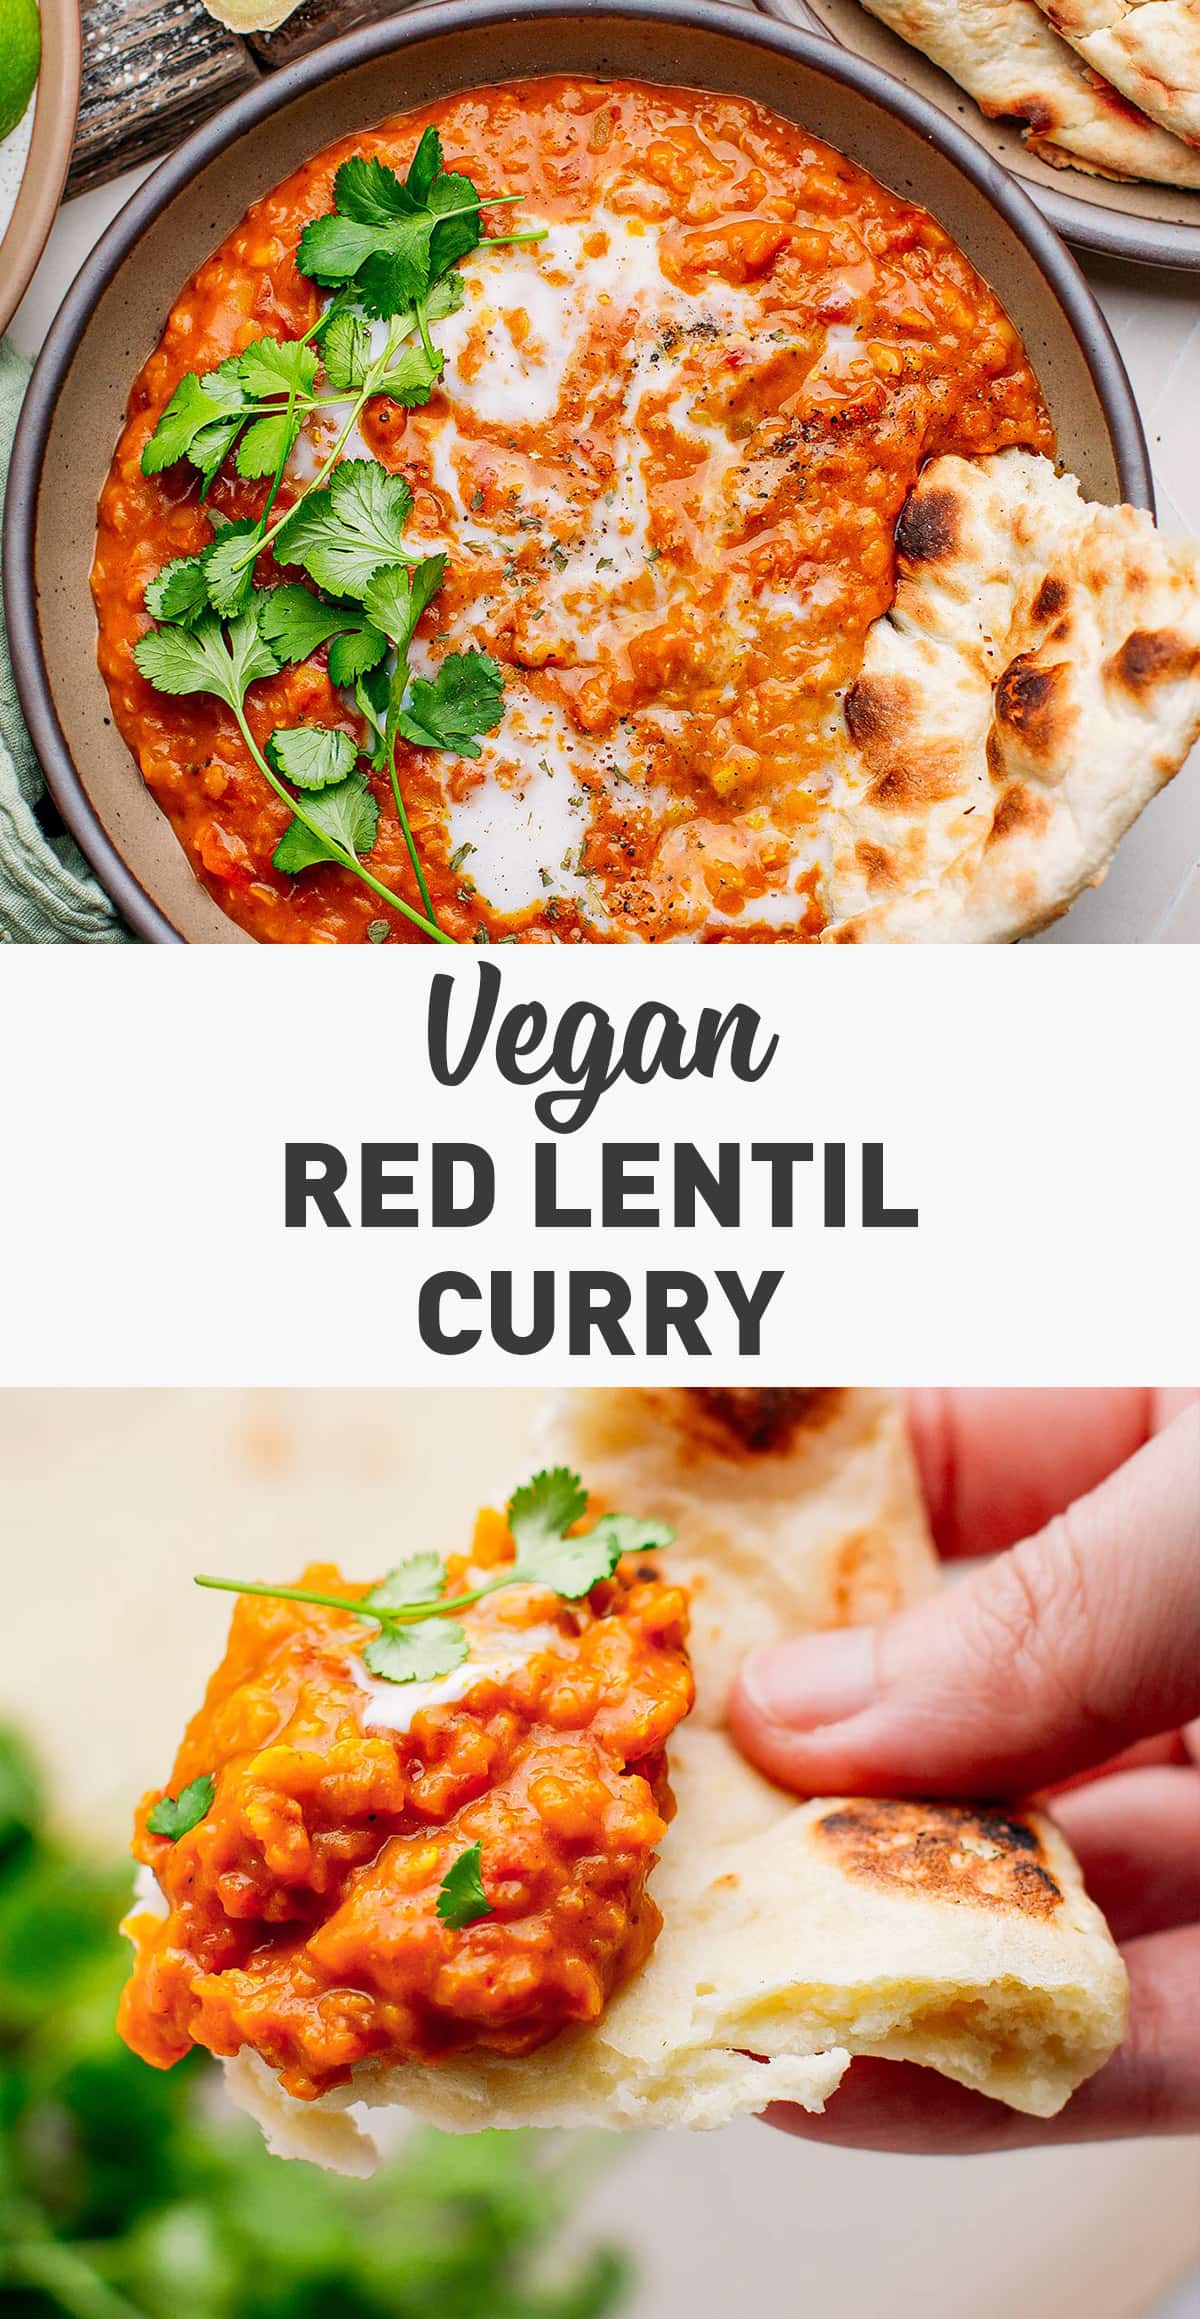 This one-pot vegan red lentil curry is insanely creamy, spiced to perfection, and so flavorful! Packed with red lentils, ginger, garlic, and coconut milk, this Indian-inspired curry is truly restaurant-quality! Serve it with a side of white rice, naan, or sautéed greens for a delicious plant-based meal. #indian #curry #veganrecipes